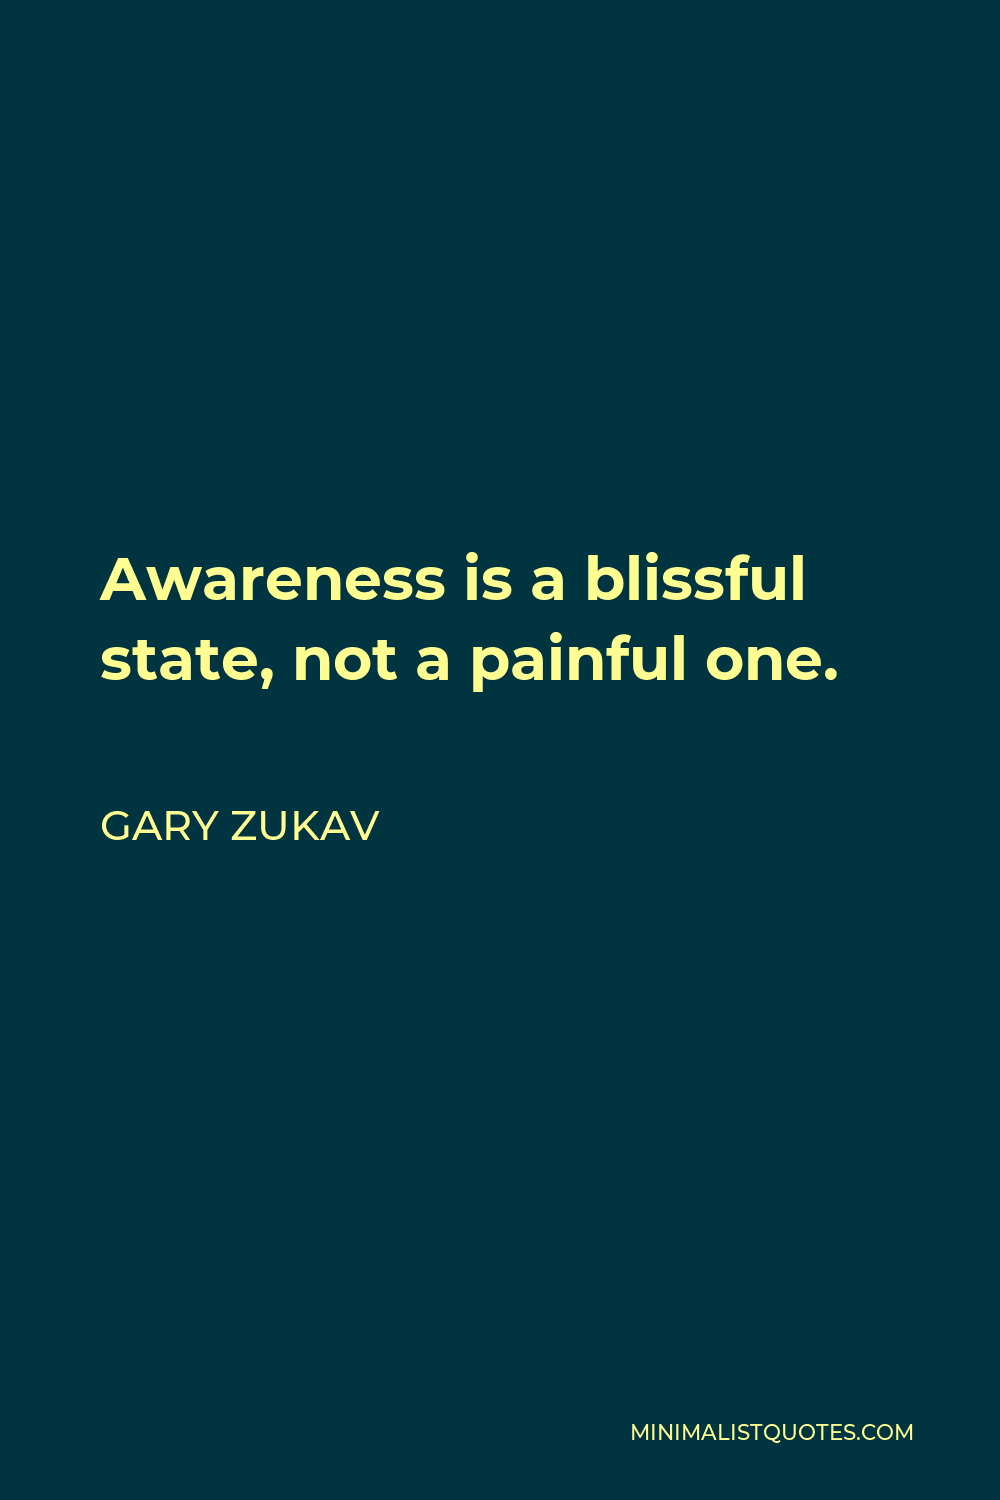 Gary Zukav Quote - Awareness is a blissful state, not a painful one.